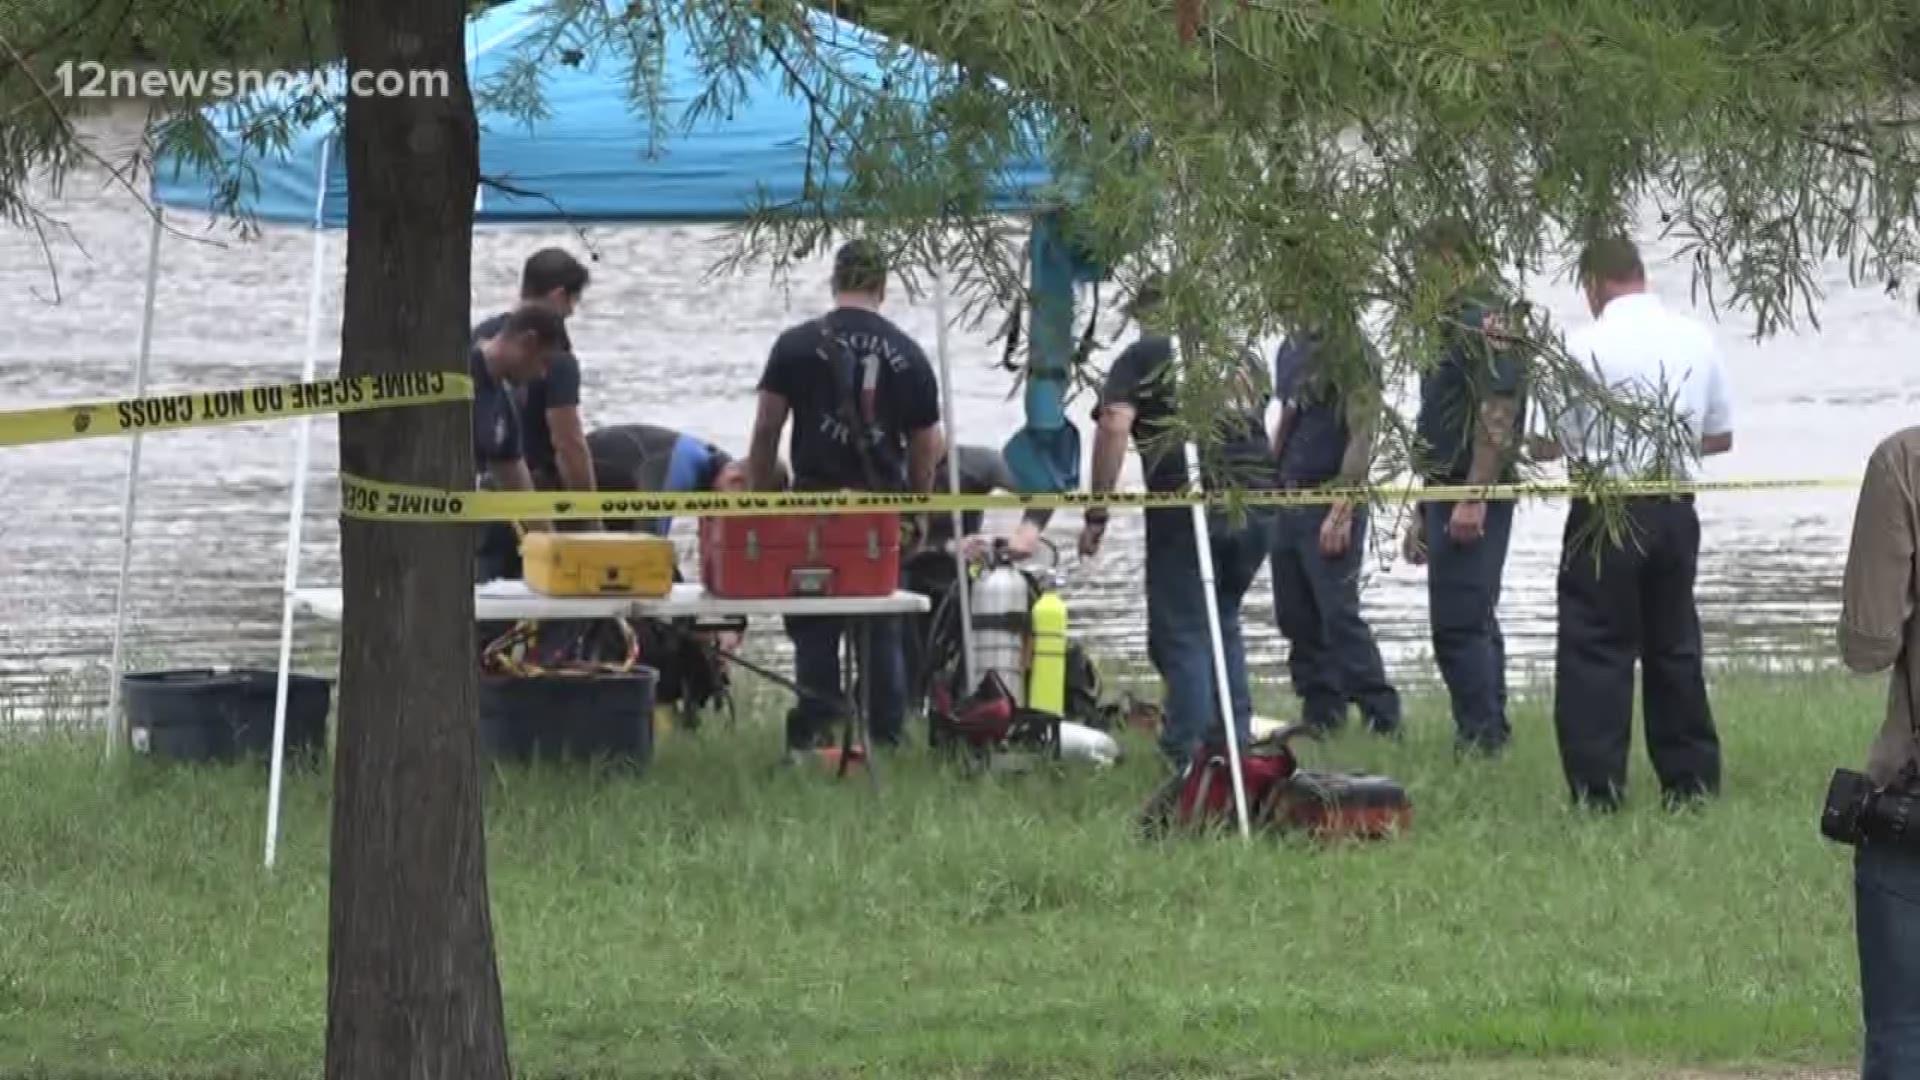 The search continues after officials say the man jumped in the water and never resurfaced.